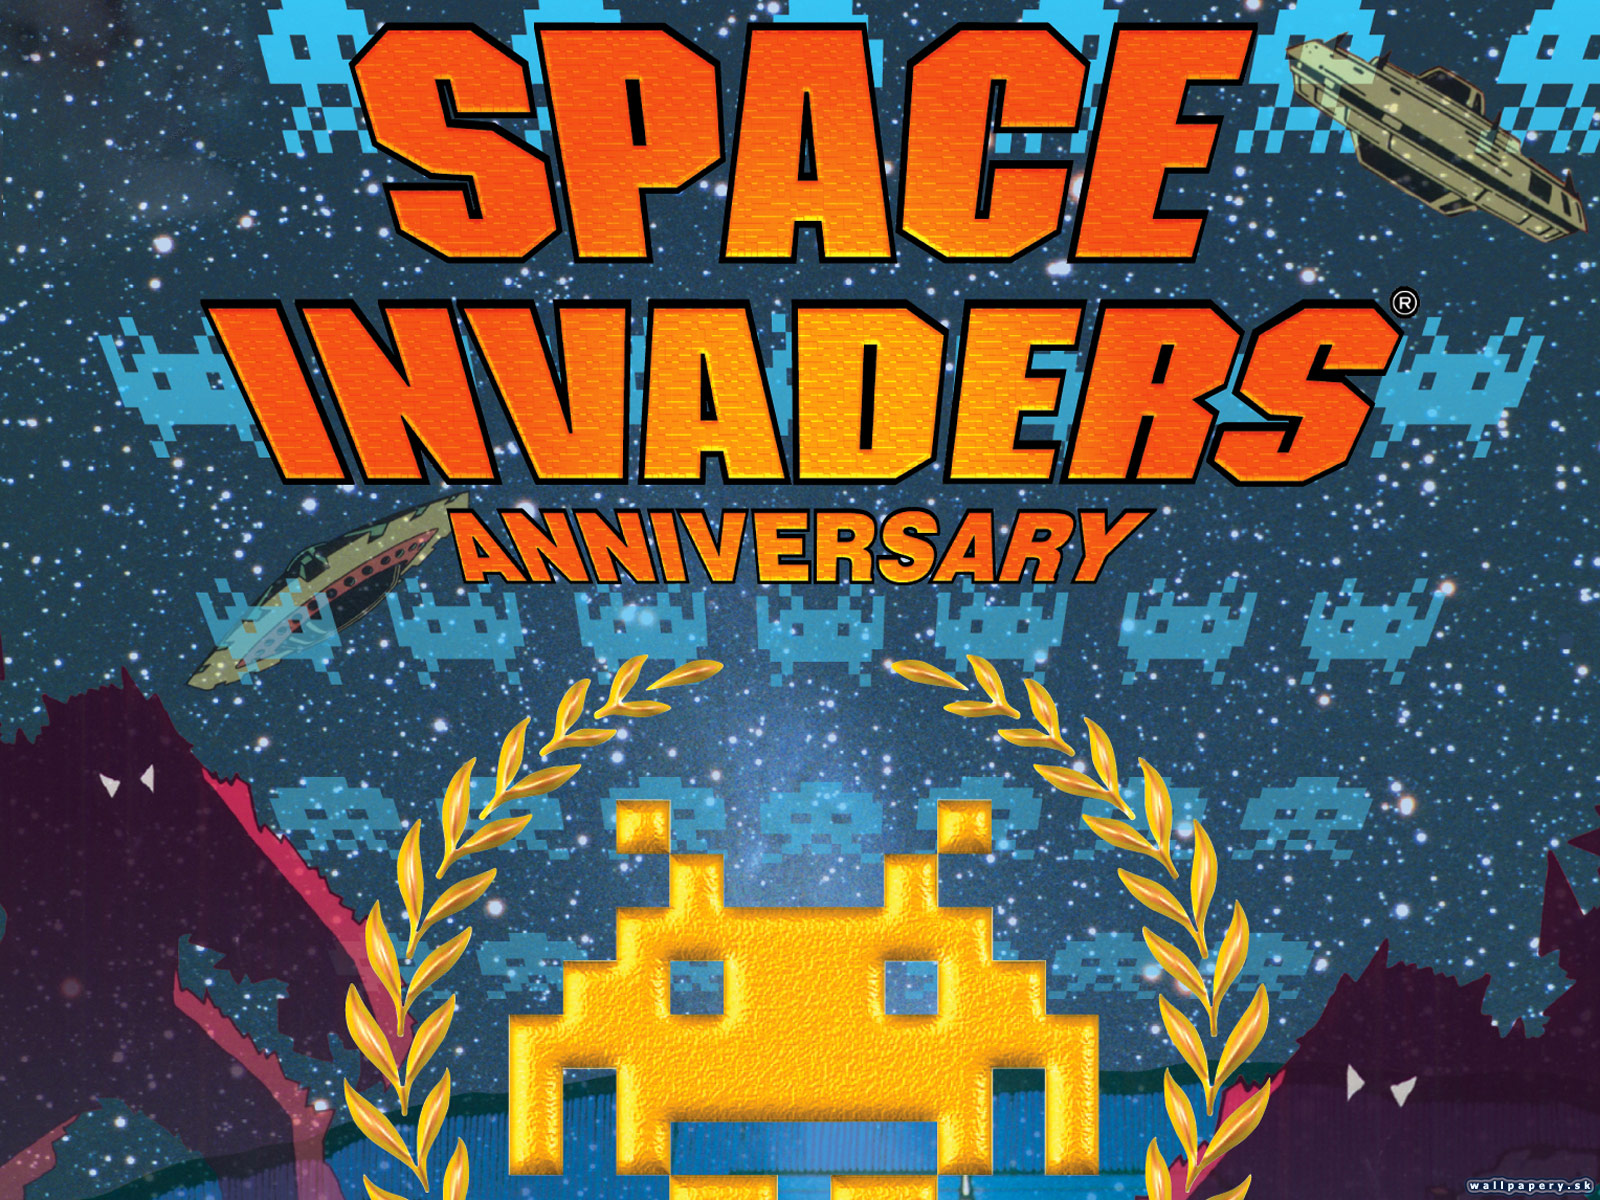 Space Invaders Anniversary - wallpaper 2